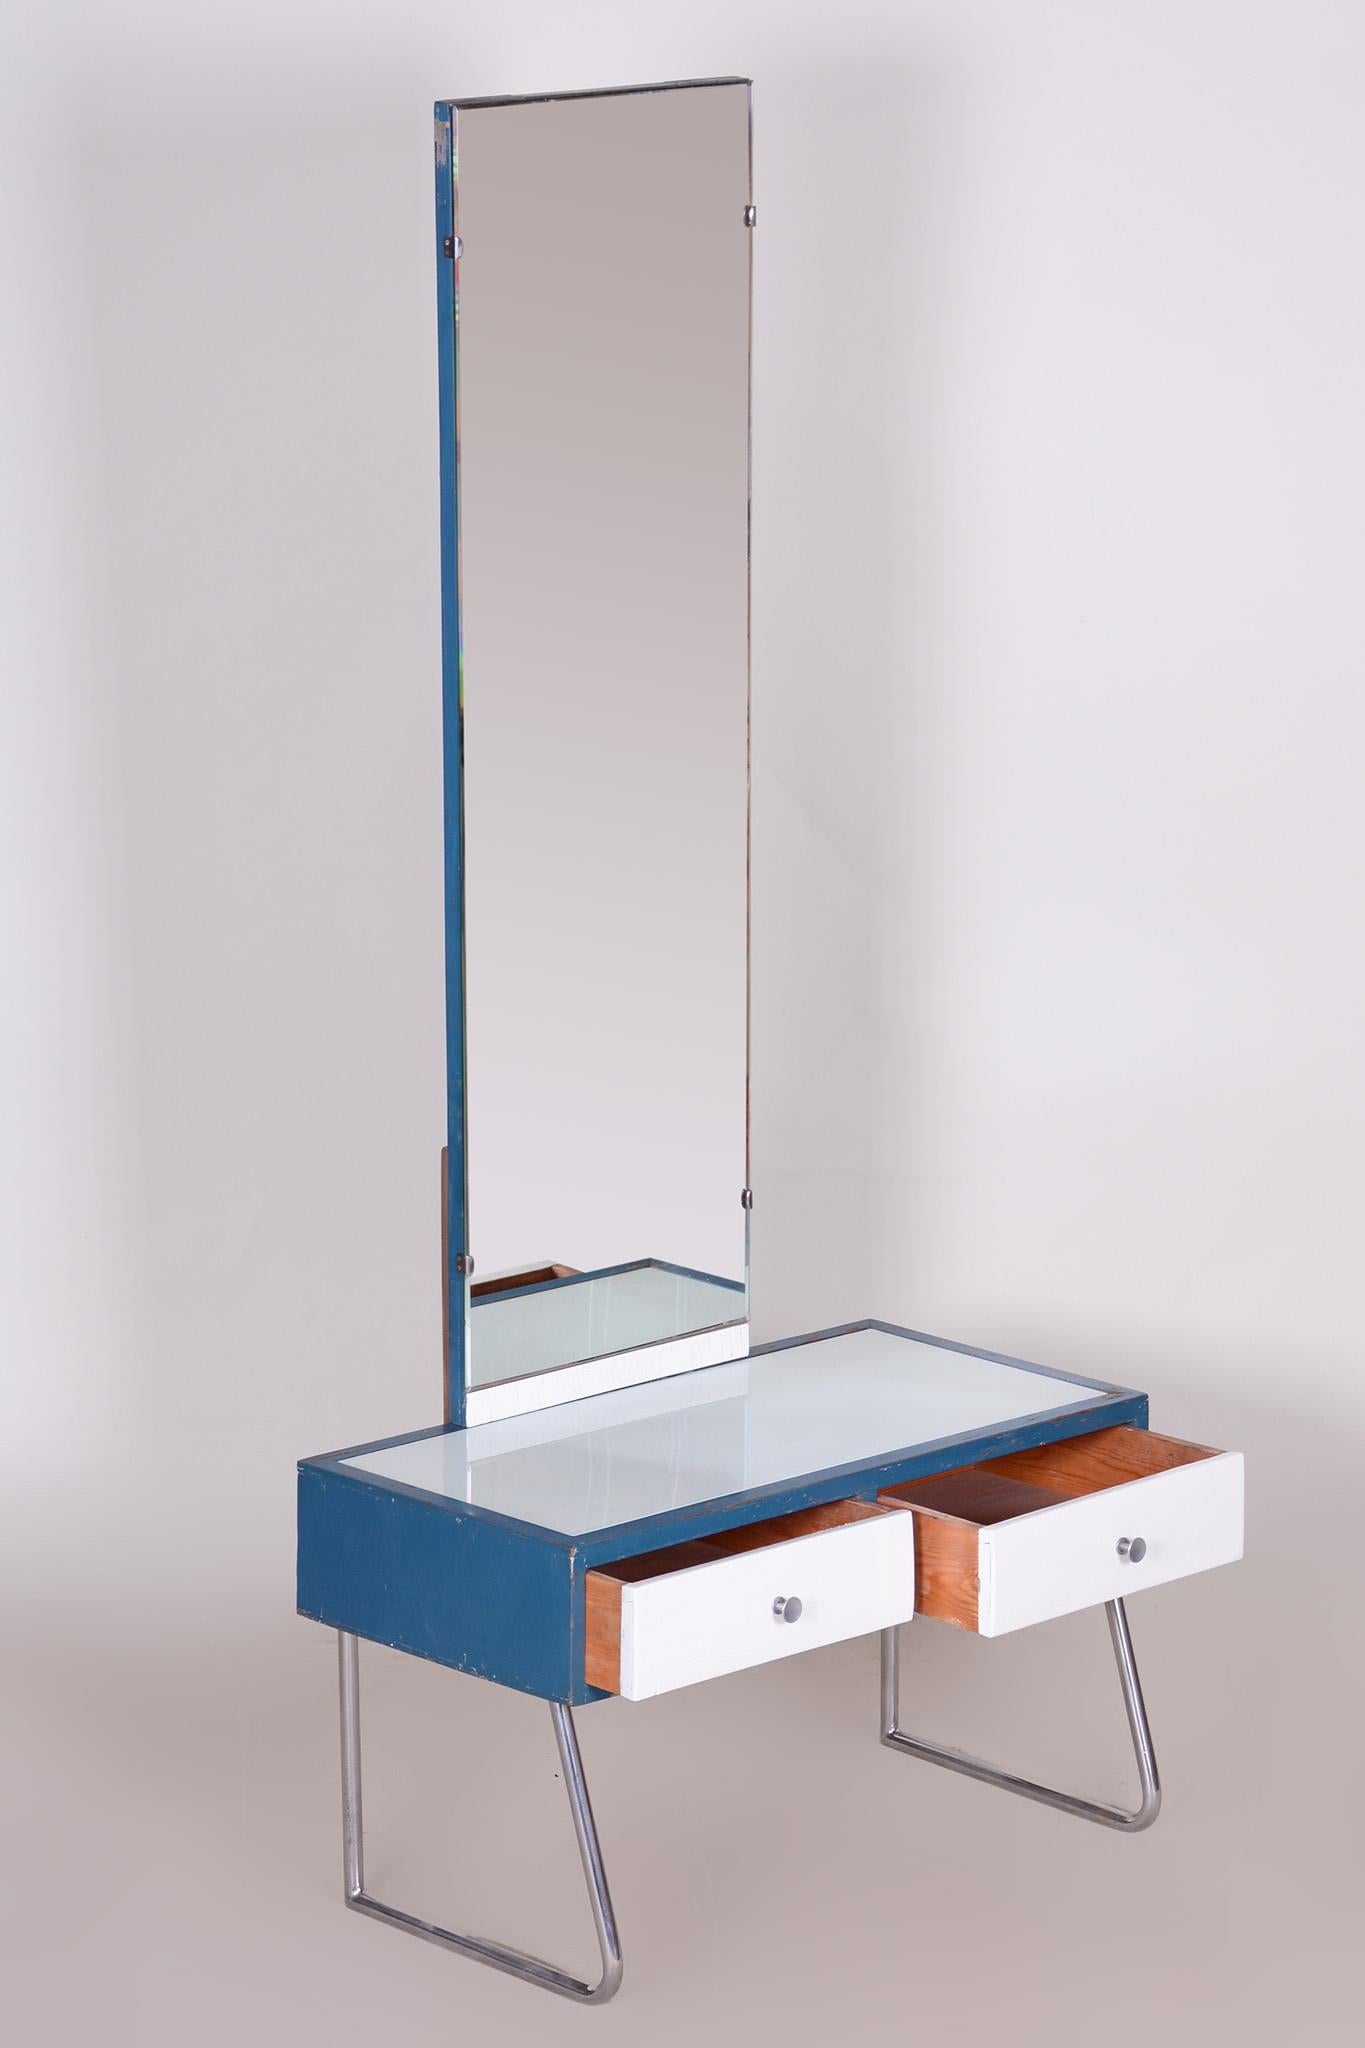 Blue and White Chrome Bauhaus Dressing Mirror, Made in 1930s, Czechia, Vichr For Sale 5